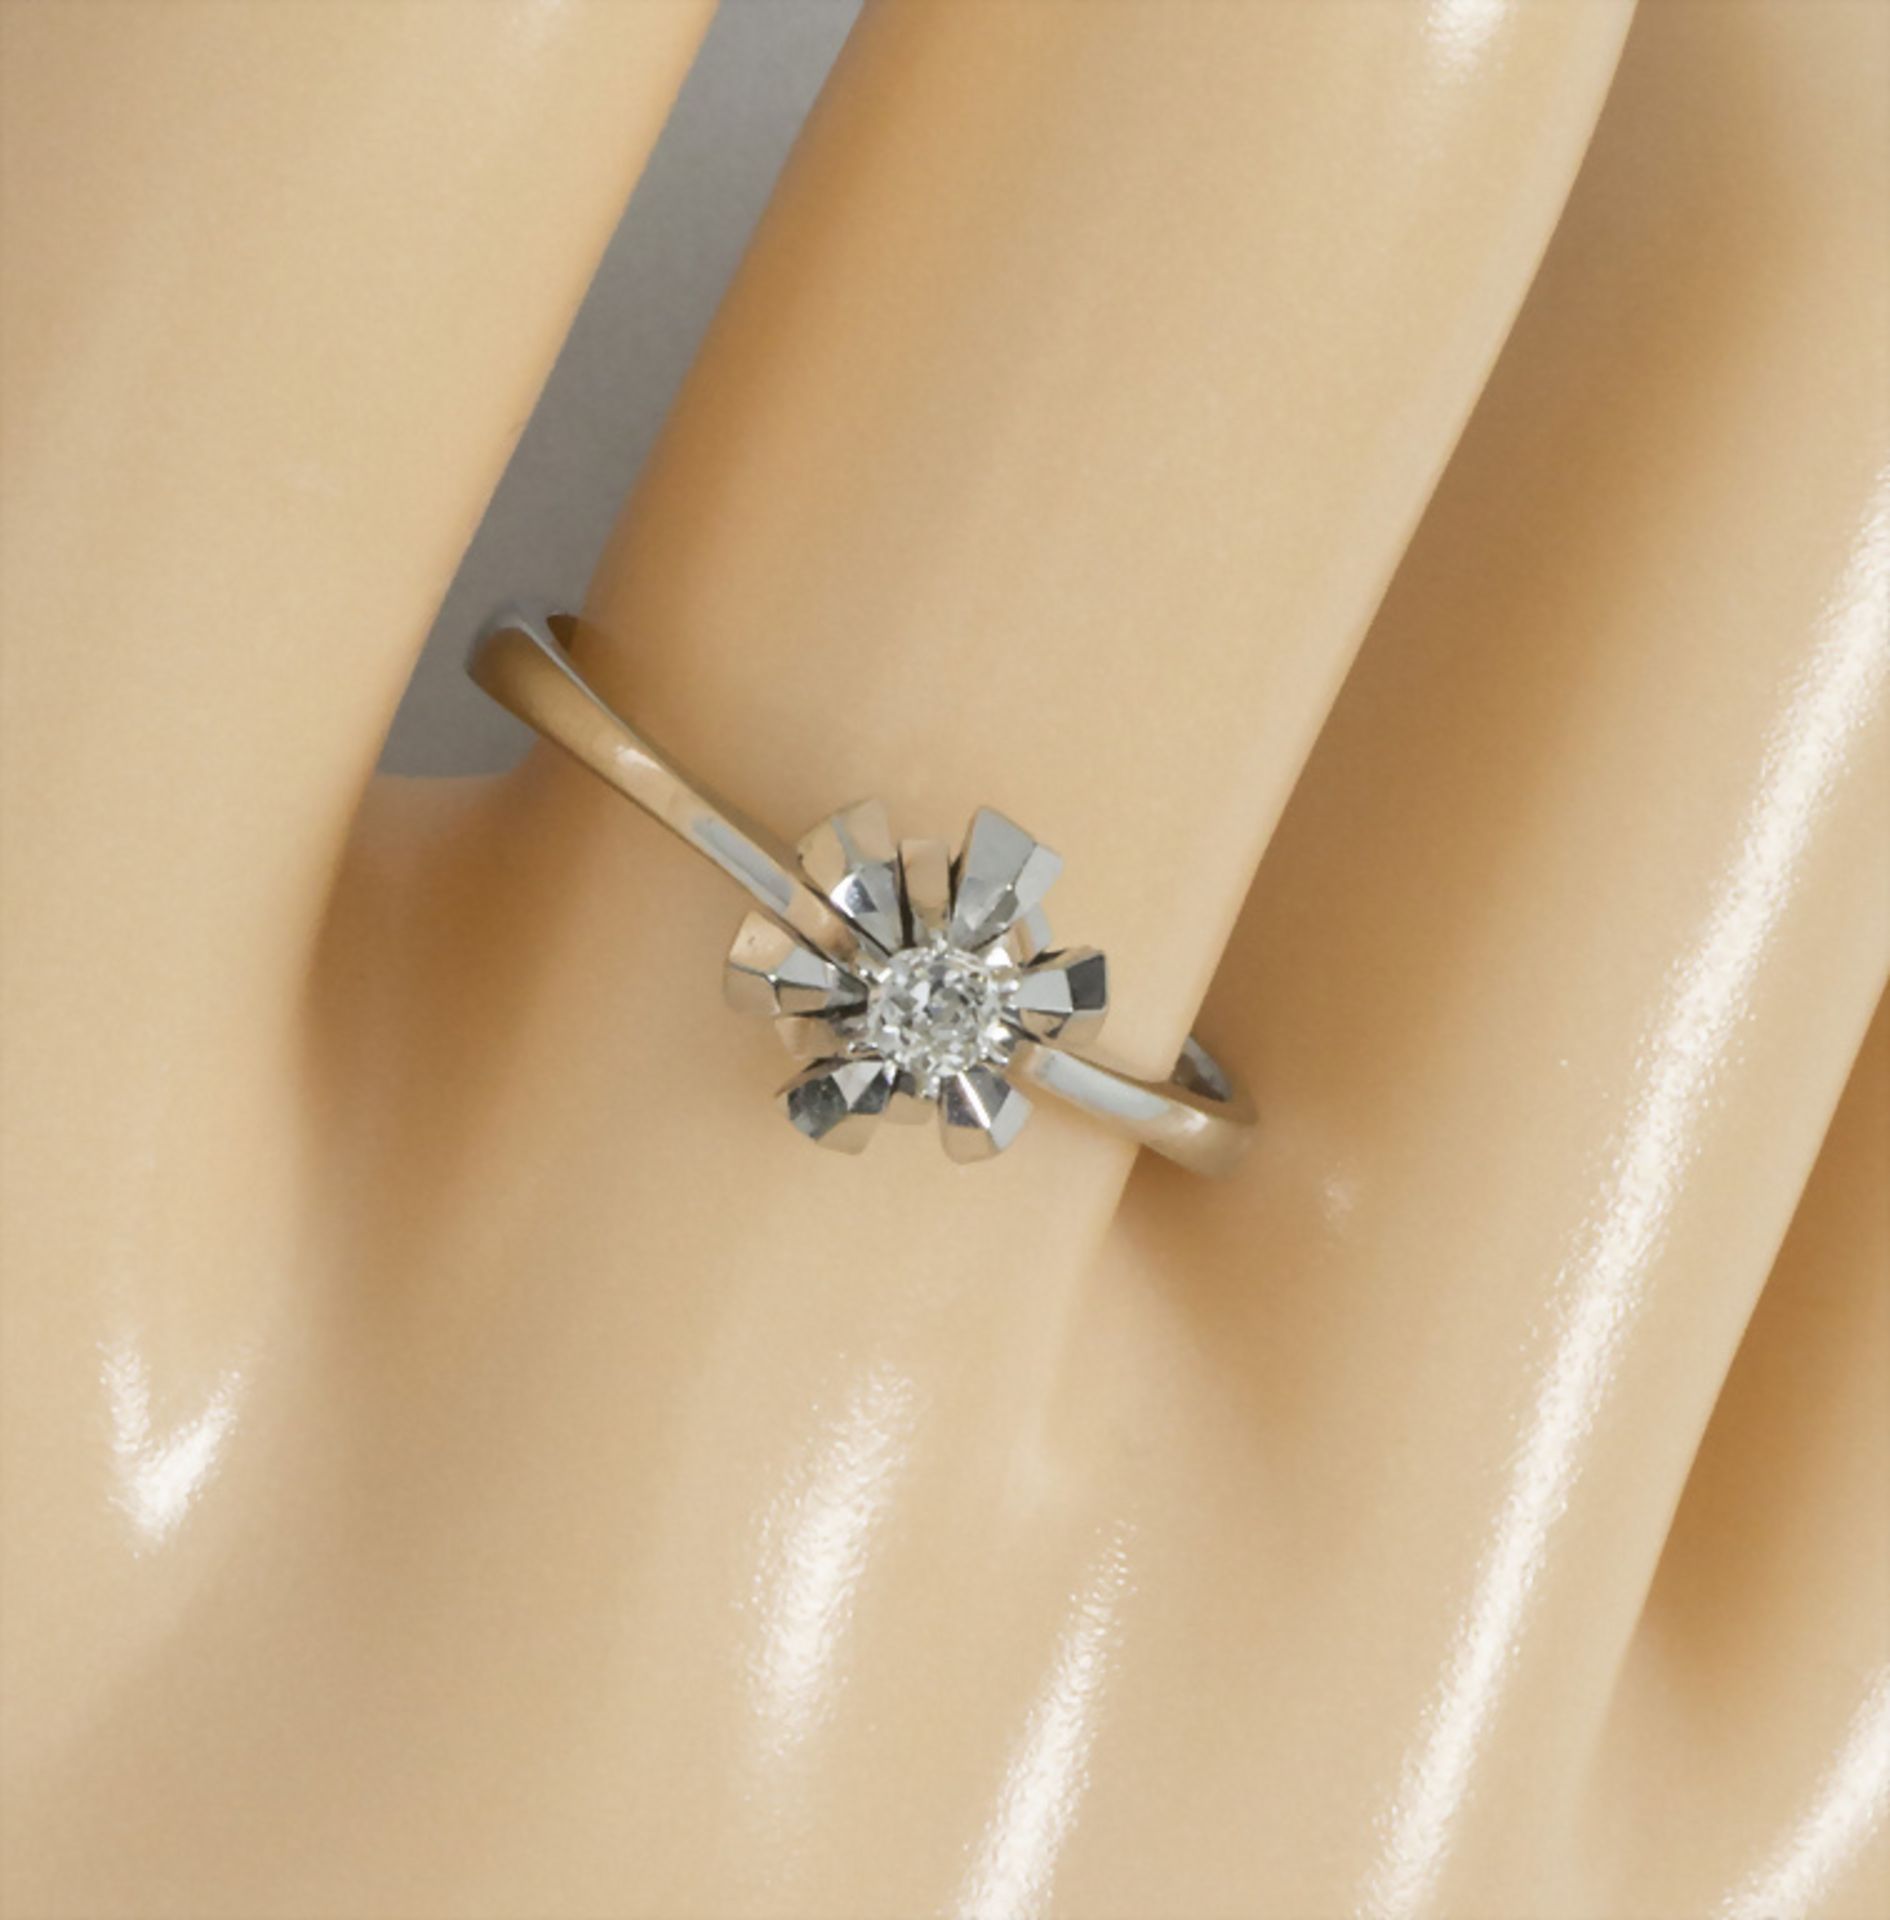 Brillant Solitärring / A brilliant solitaire ring in 18k gold - Image 6 of 6